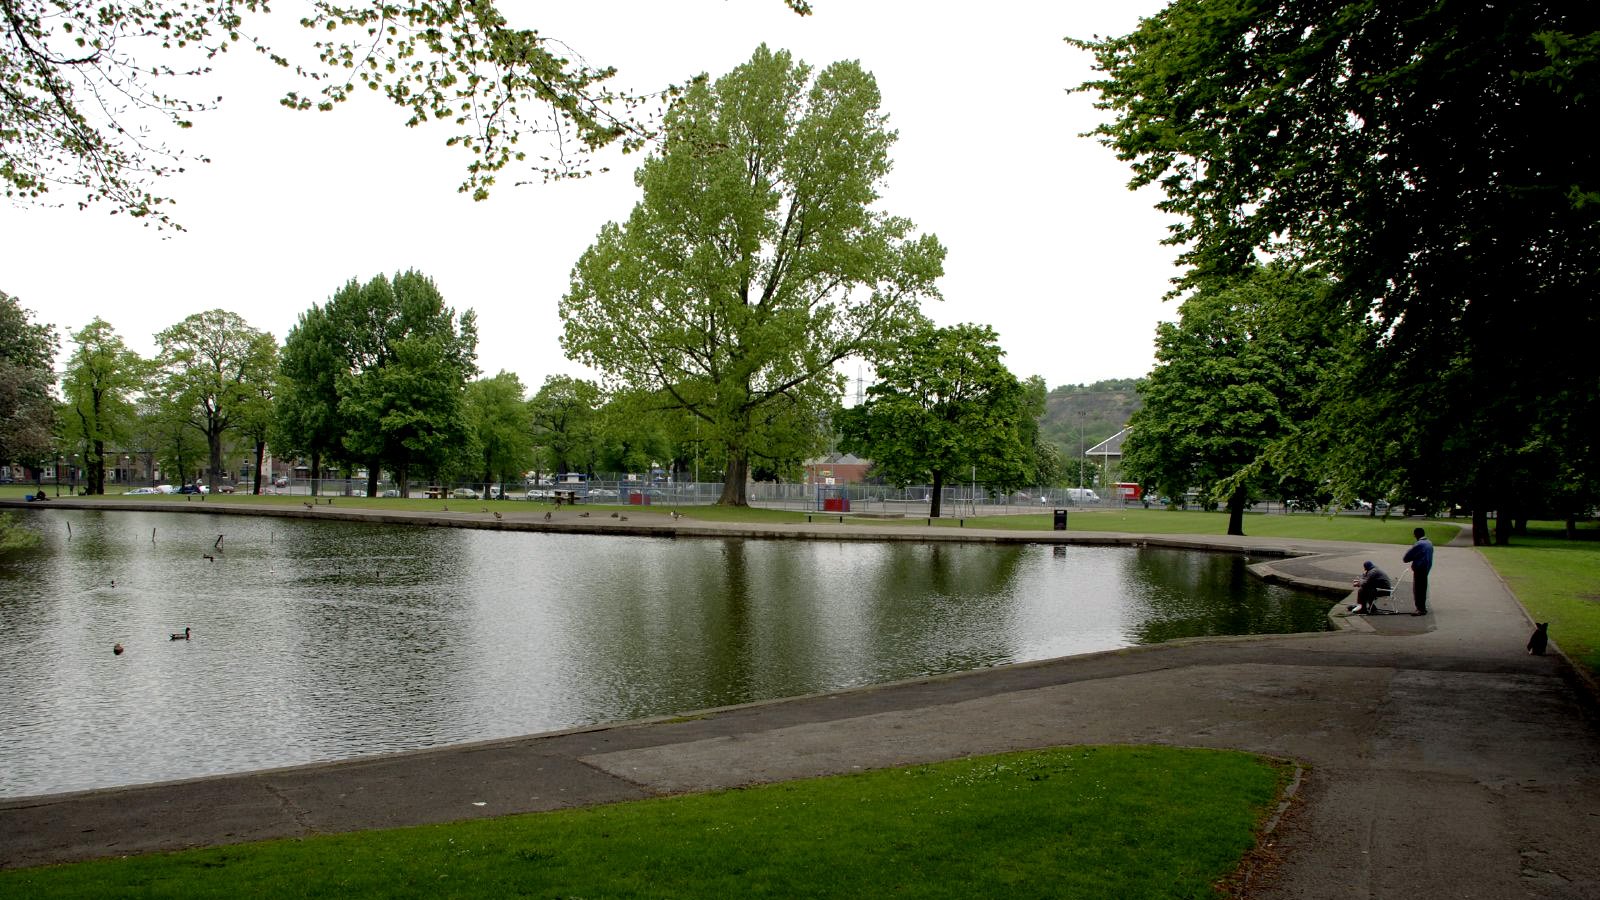 Hillsborough Park, looking over the fishing lake and tennis courts towards the A61